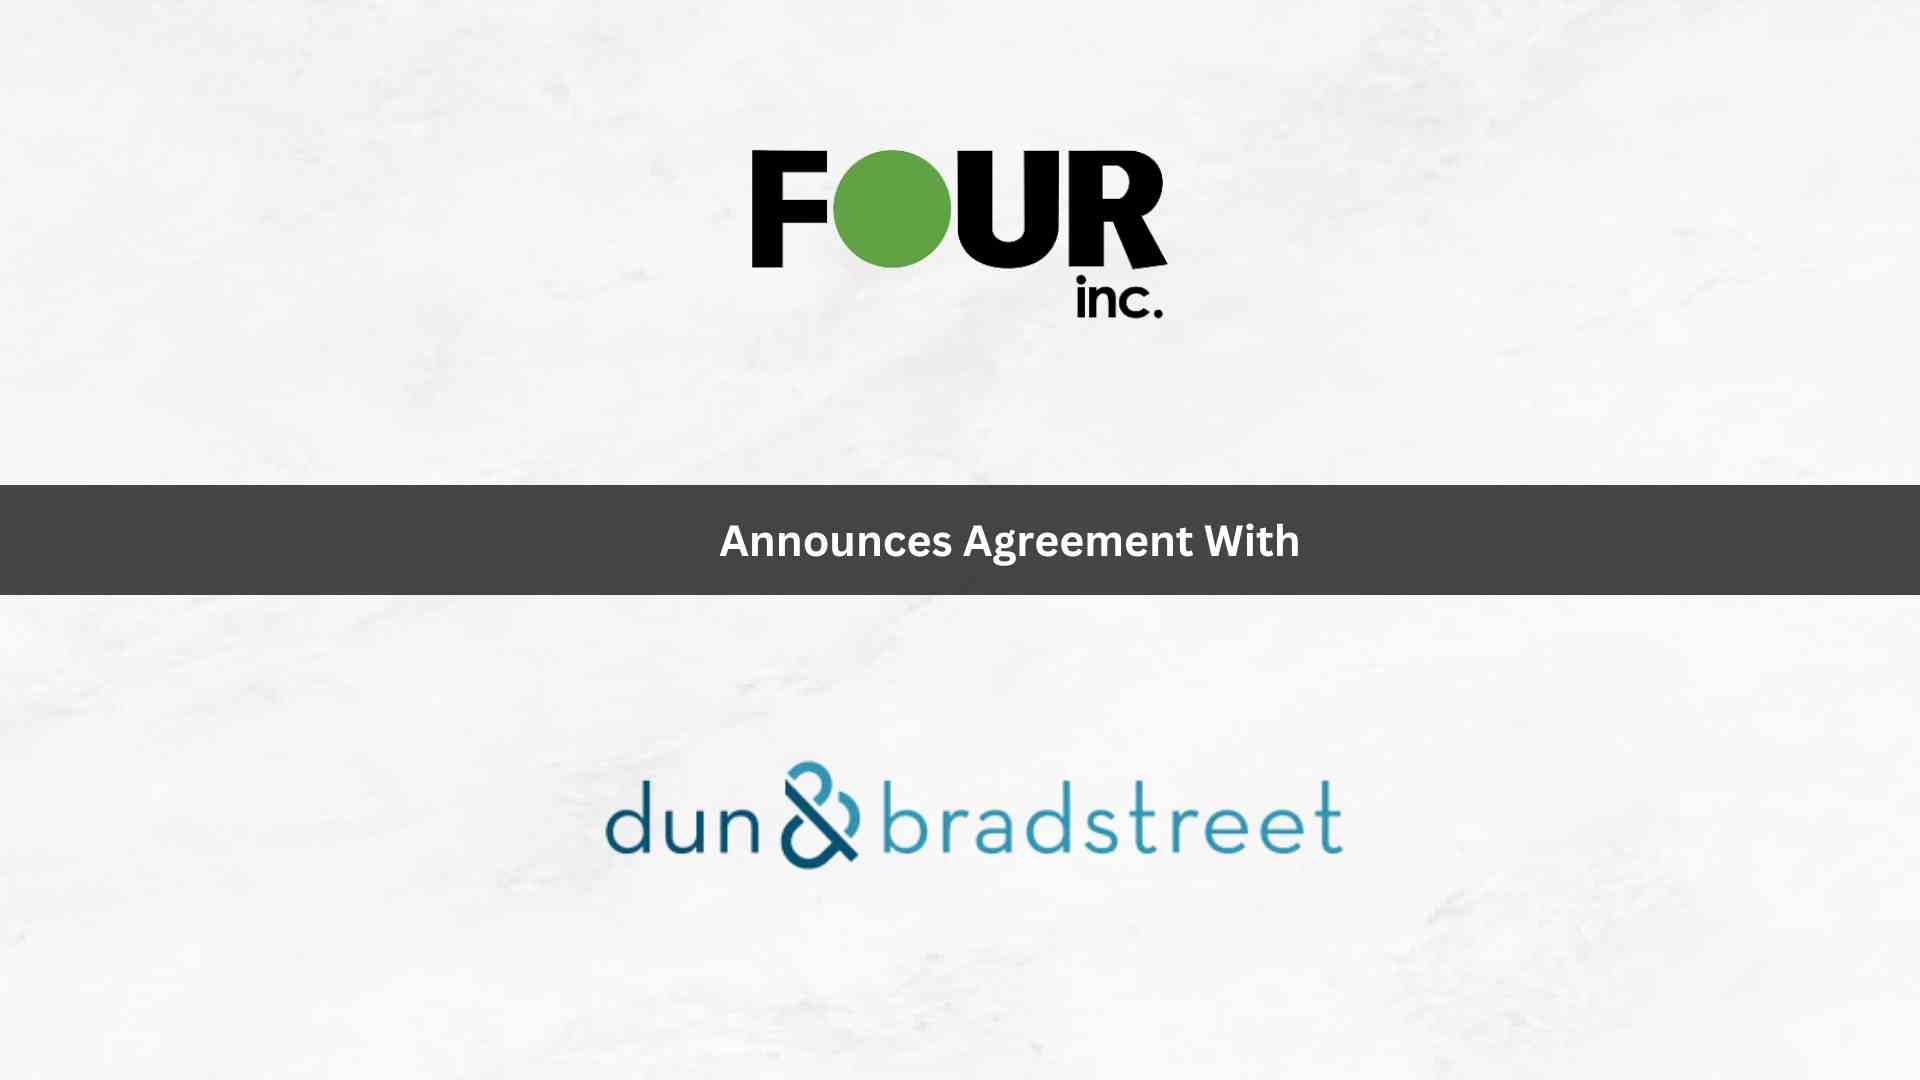 Four Inc. Announces Agreement with Dun & Bradstreet to Empower Government Agencies with Data-Driven Solutions